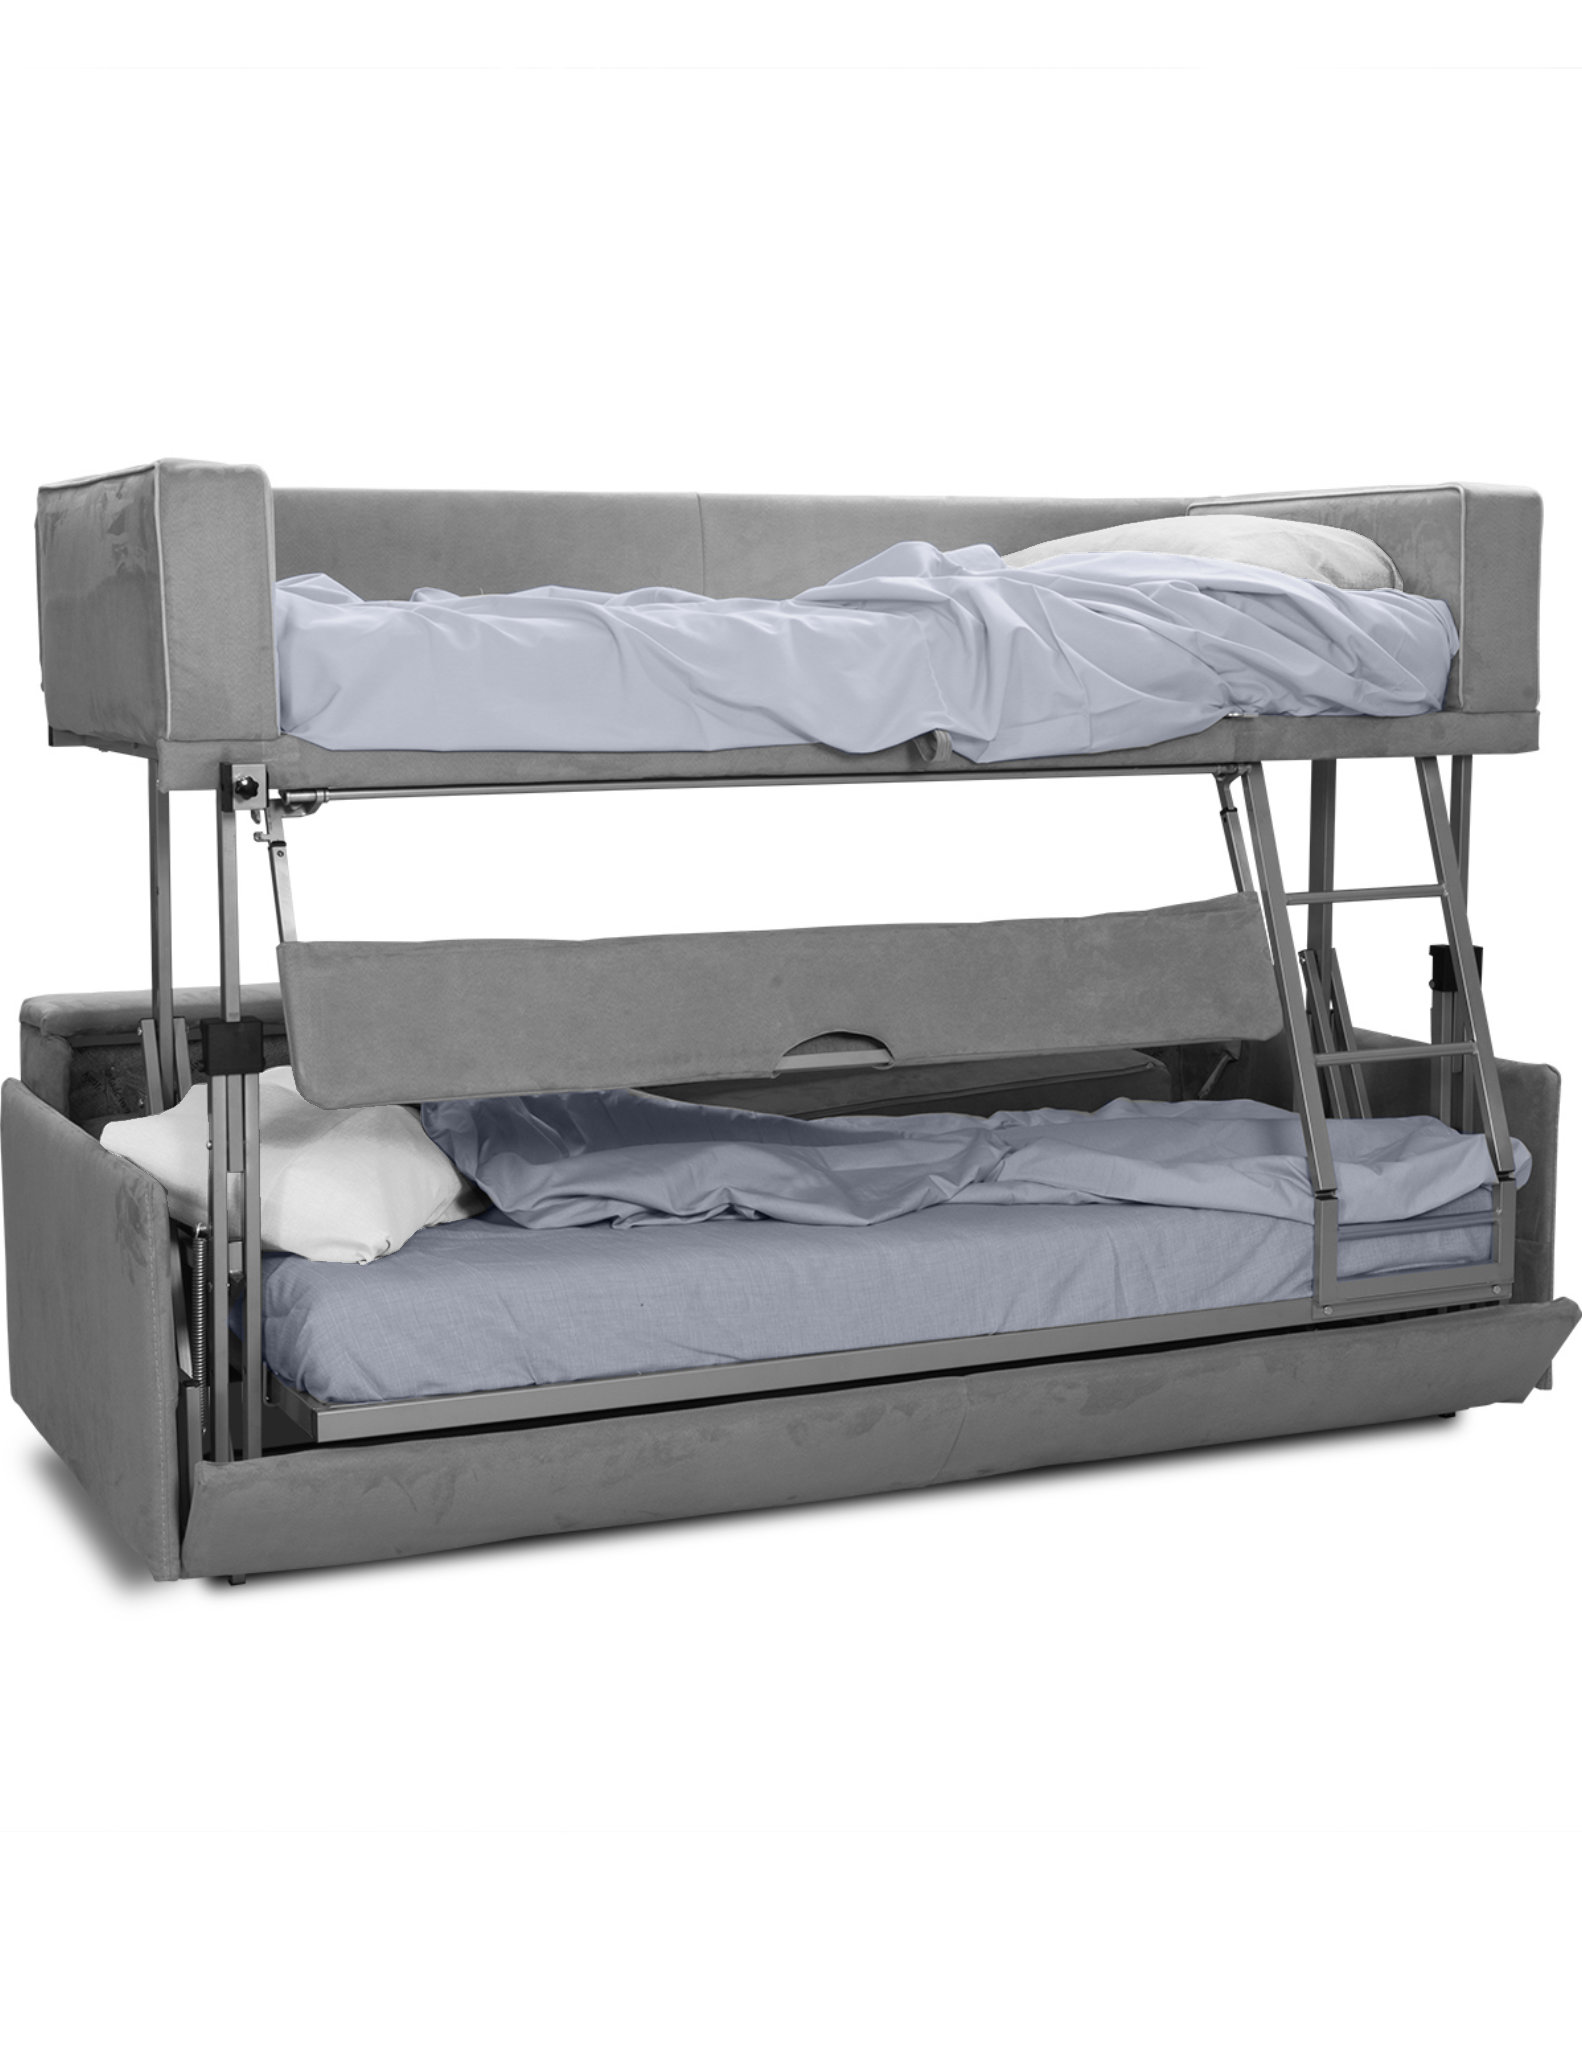 Bunk Bed Couch Transformer, Bunk Beds For Less Than 100000